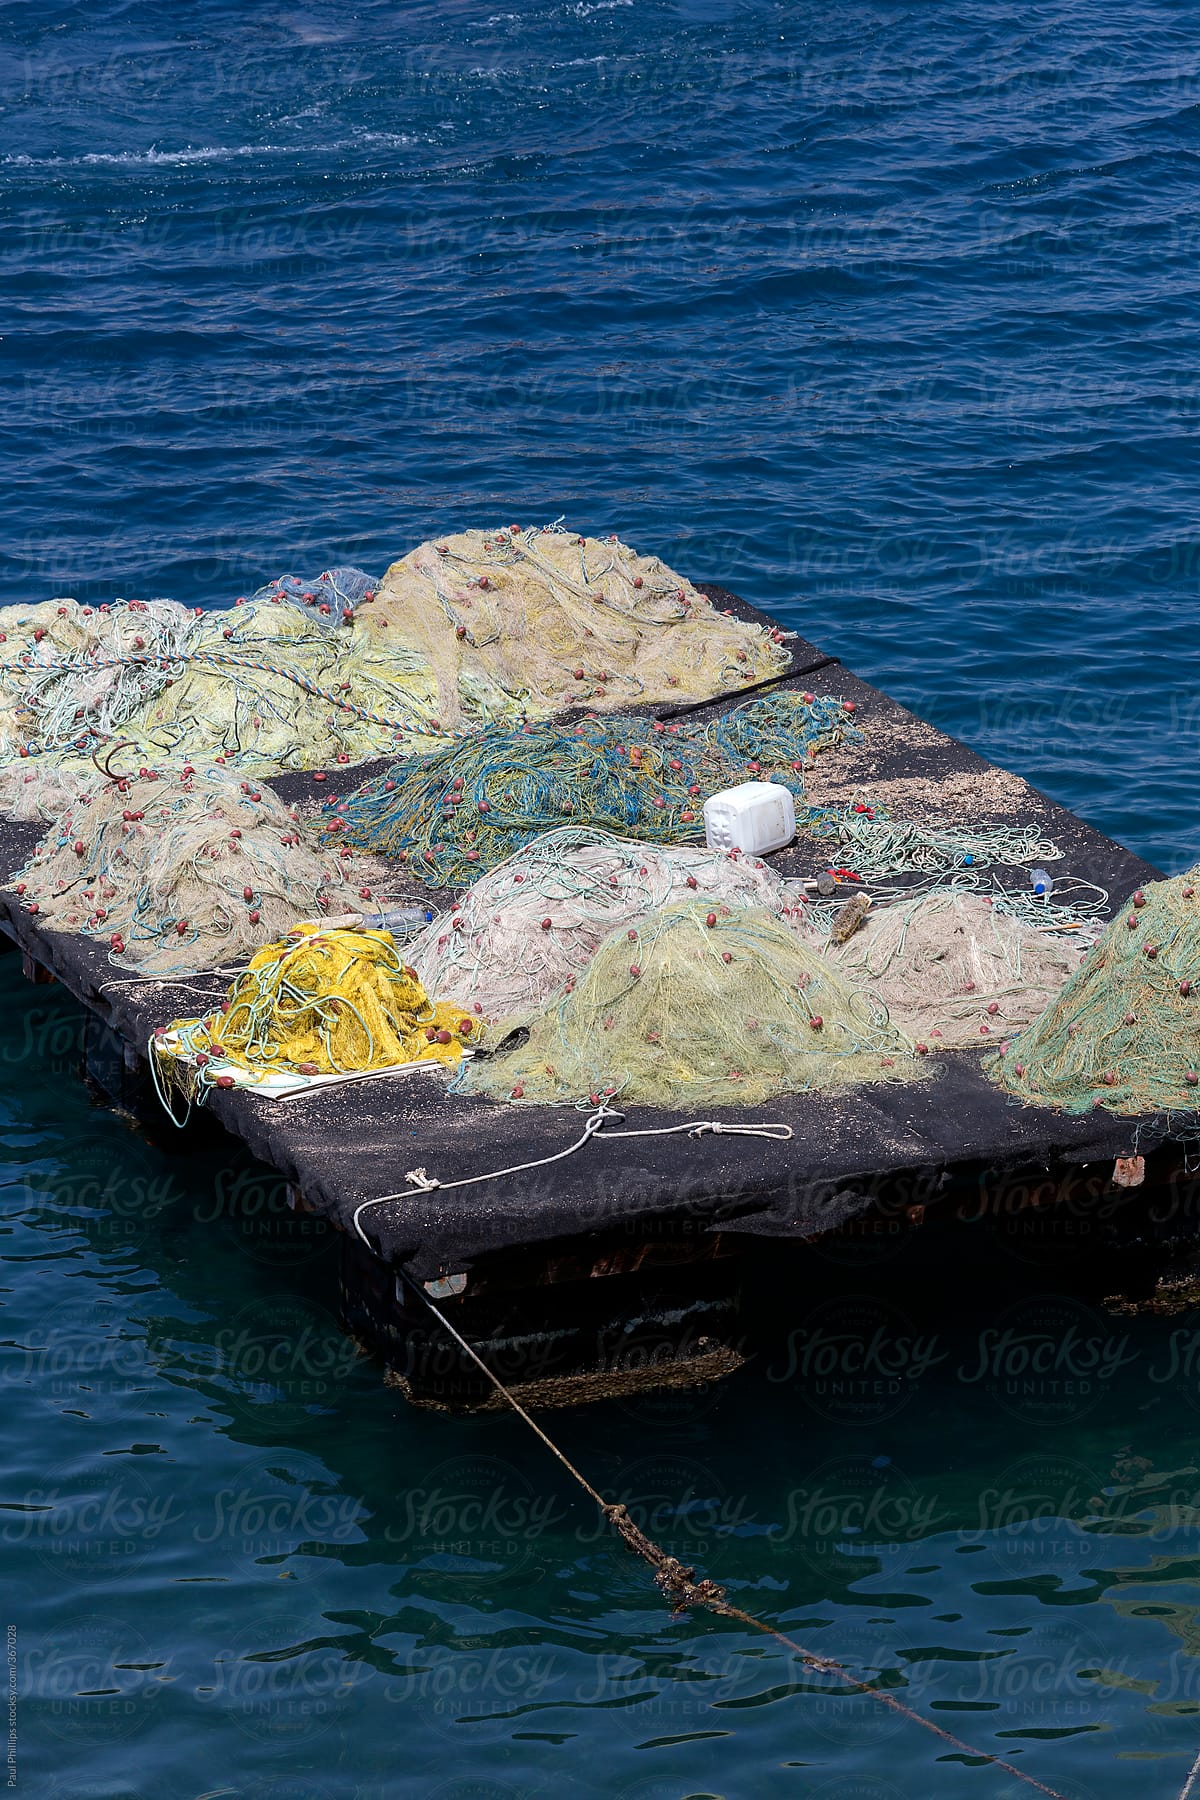 Wooden floating platform full of fishing nets drying in the sun